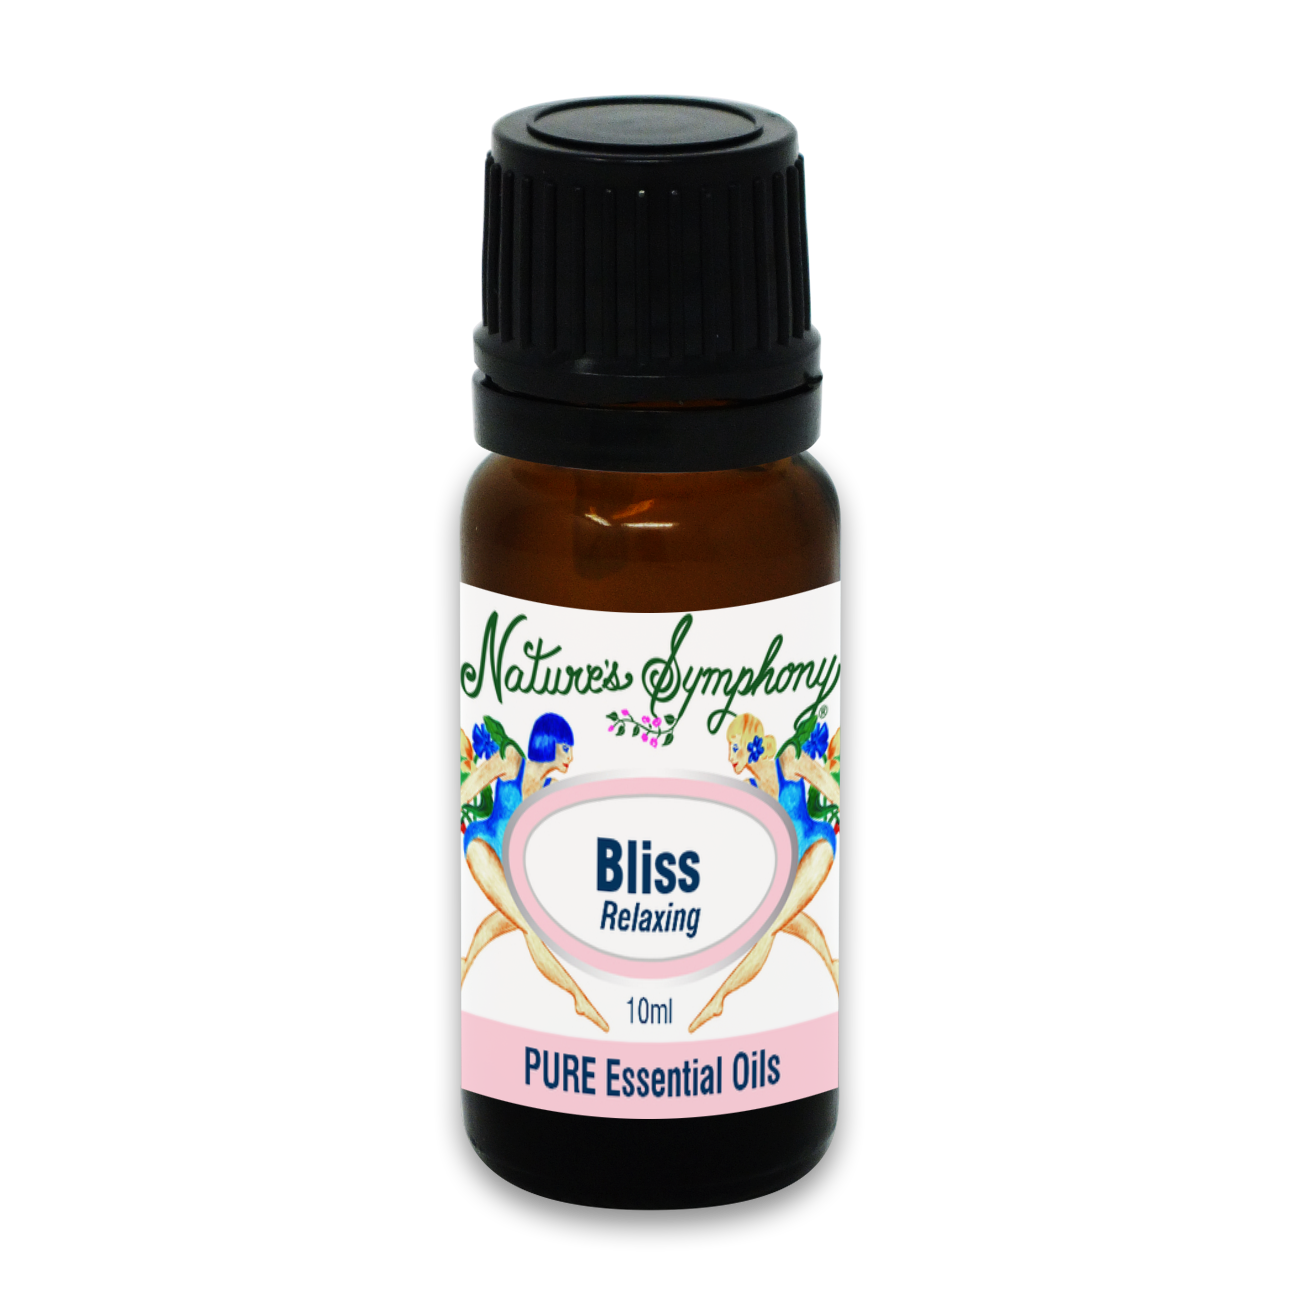 Bliss/Relaxing (Soul), Ambiance Diffusion blend - 10ml